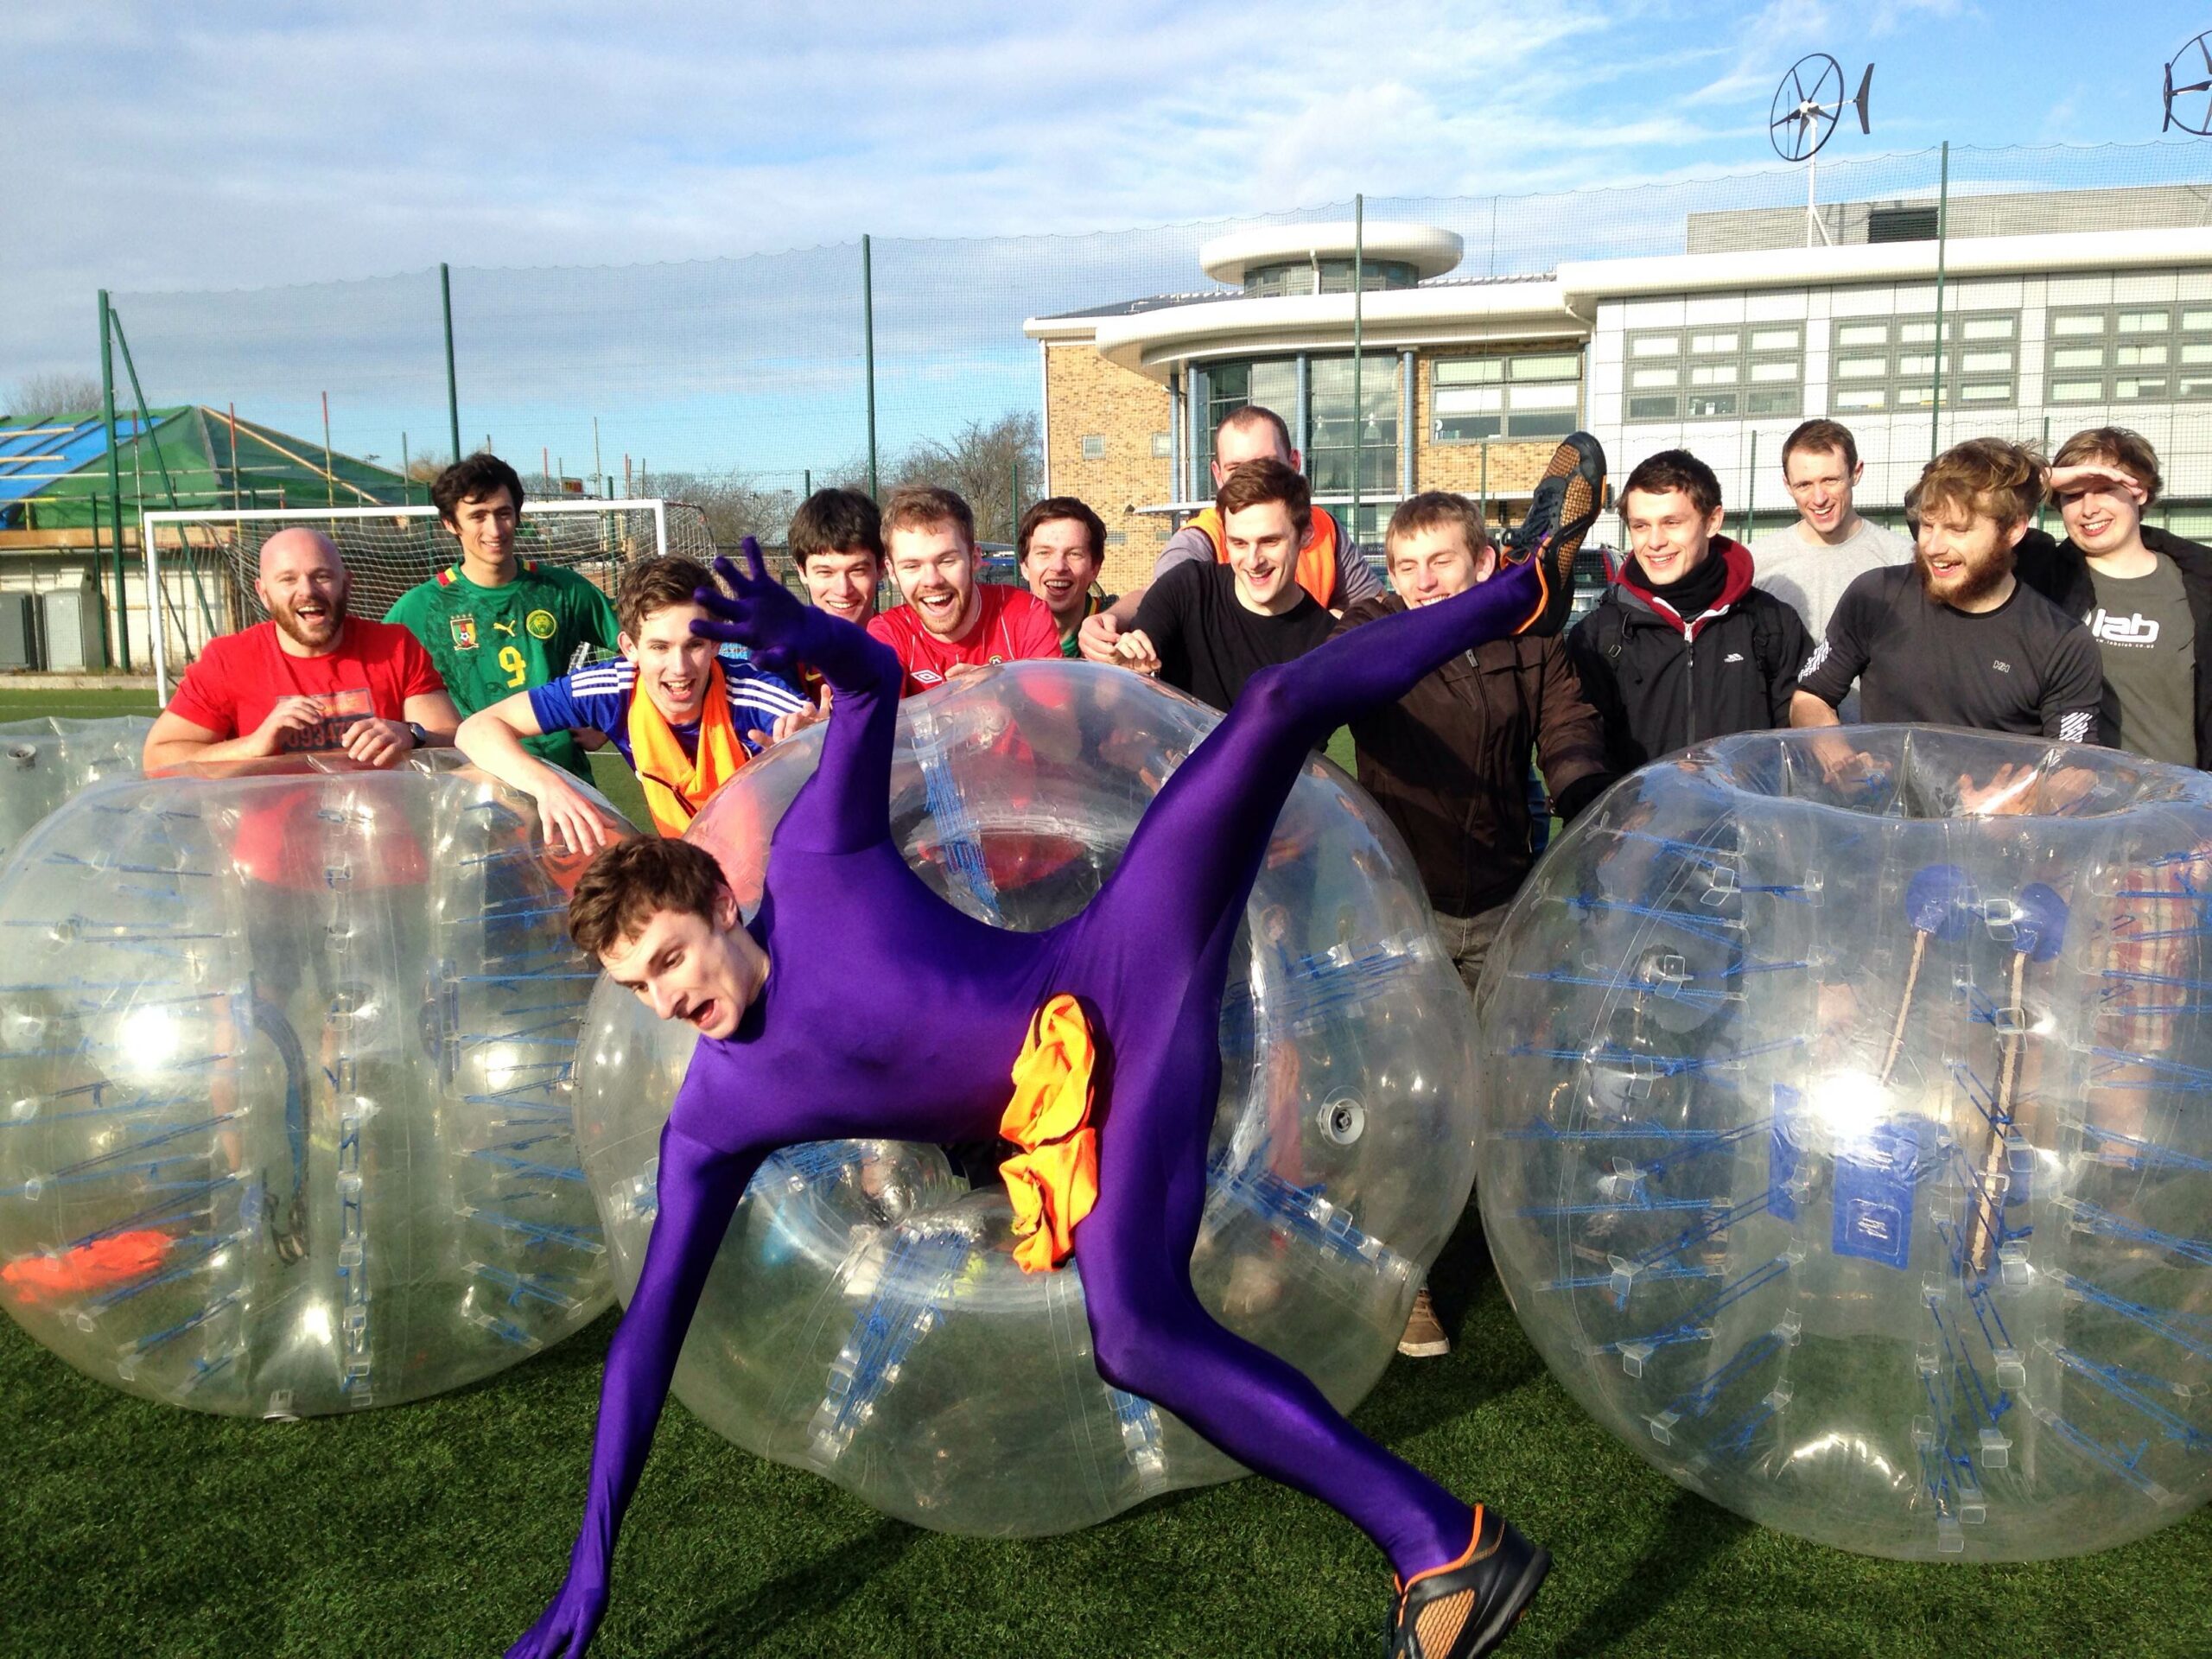 Man falls out of Zorbing football as crowd watch and laugh